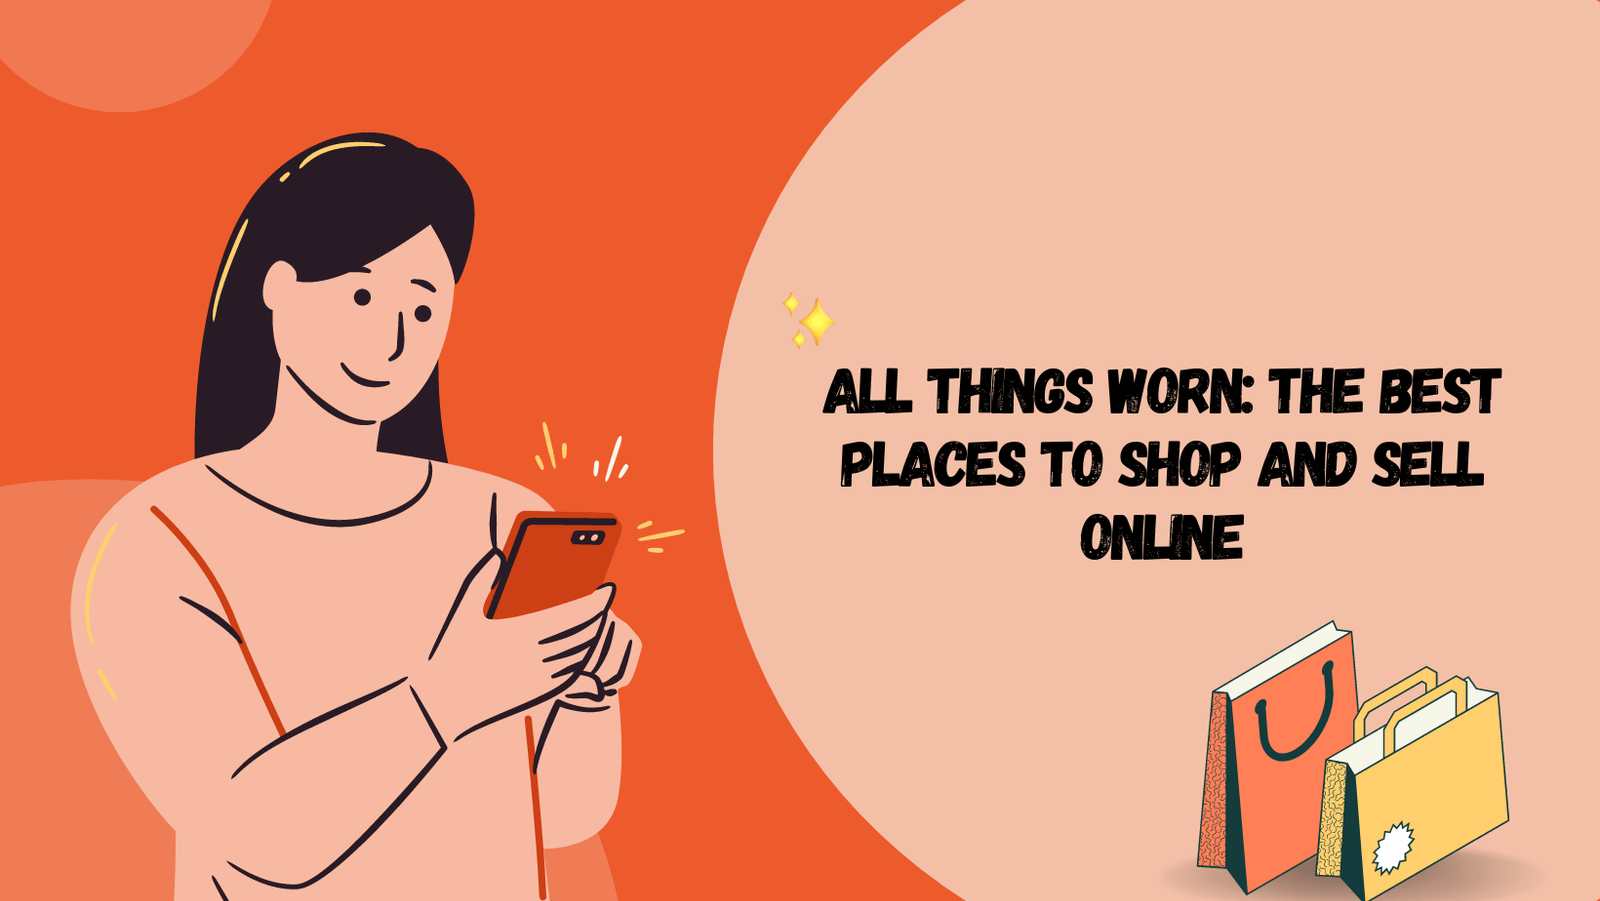 All Things Worn The Best Places to Shop and Sell Online